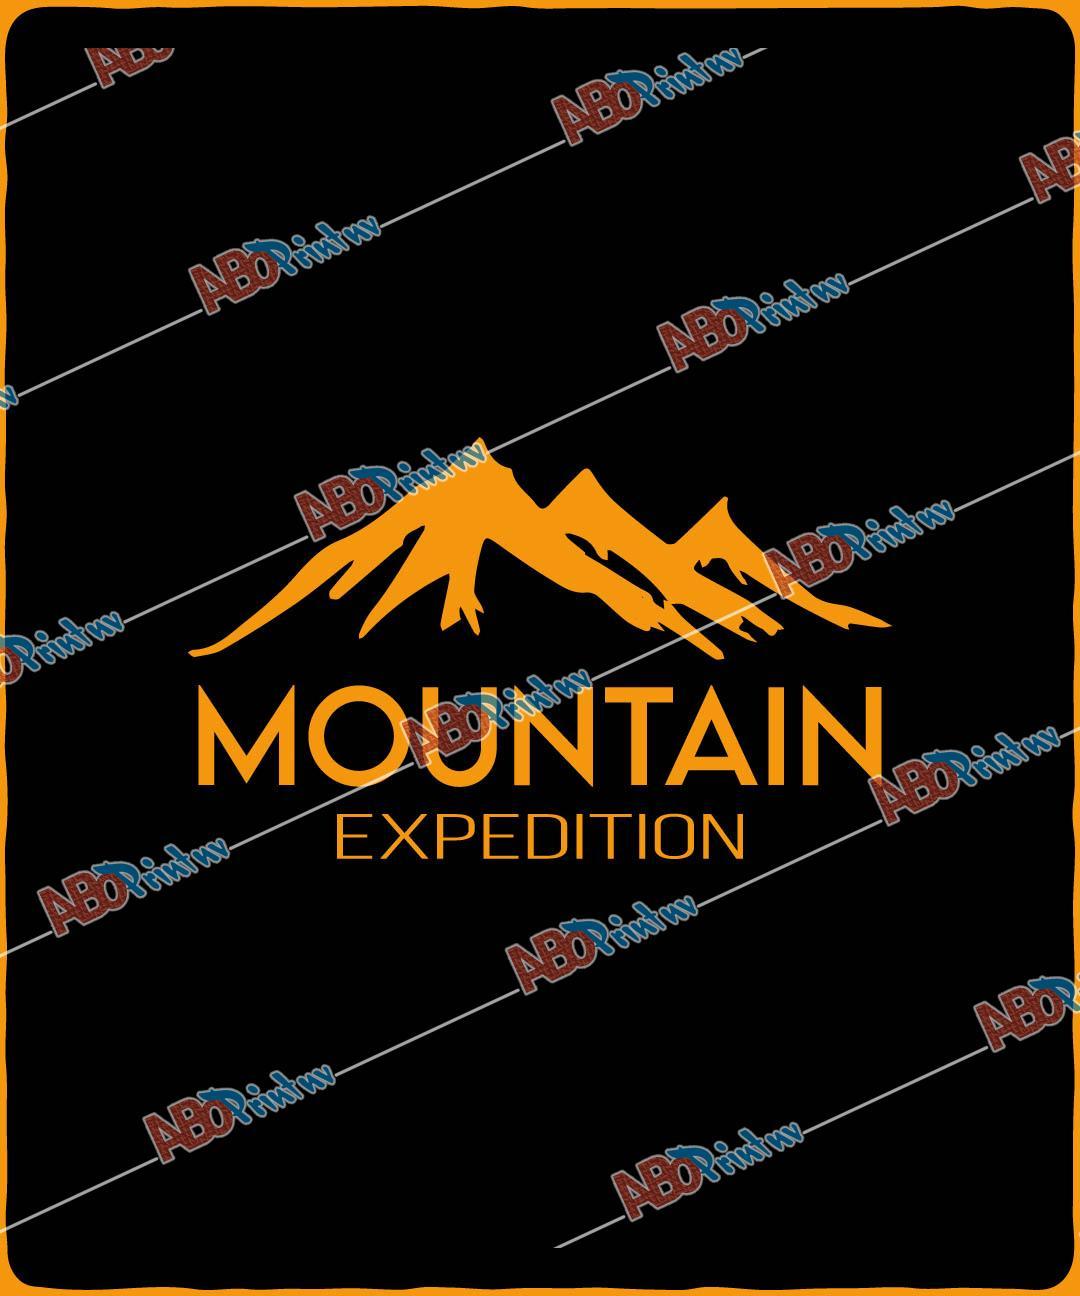 Mountain expedition.jpg